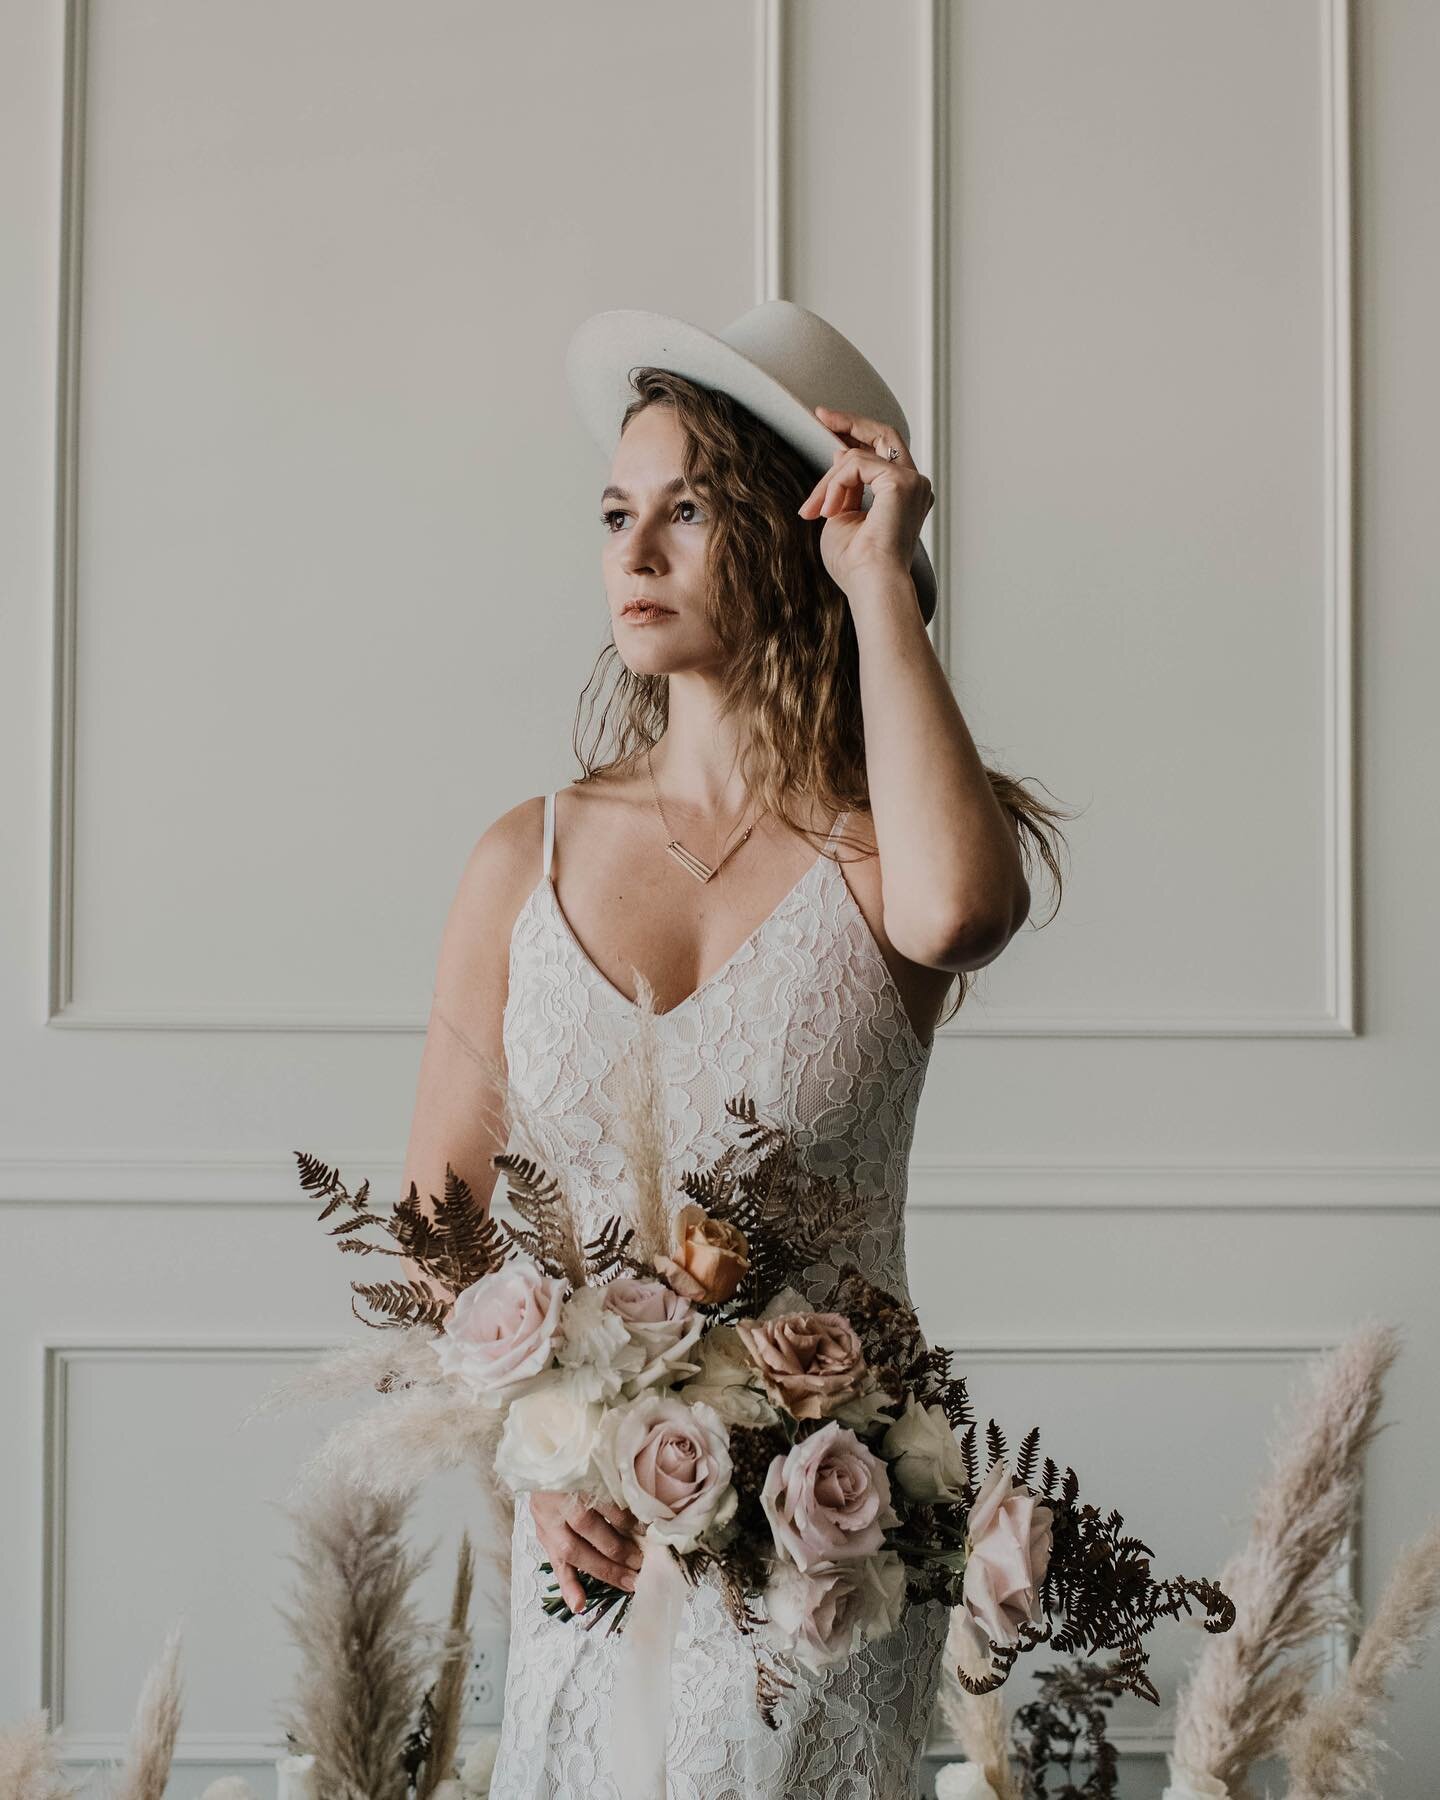 Bridal Session &bull; Tendue &bull; Portland
:
Happy Saturday! While I was in PNW last March, I had the opportunity to work with some very talented artists in the wedding industry. This bridal portrait session was at Tendue, a beautiful venue located